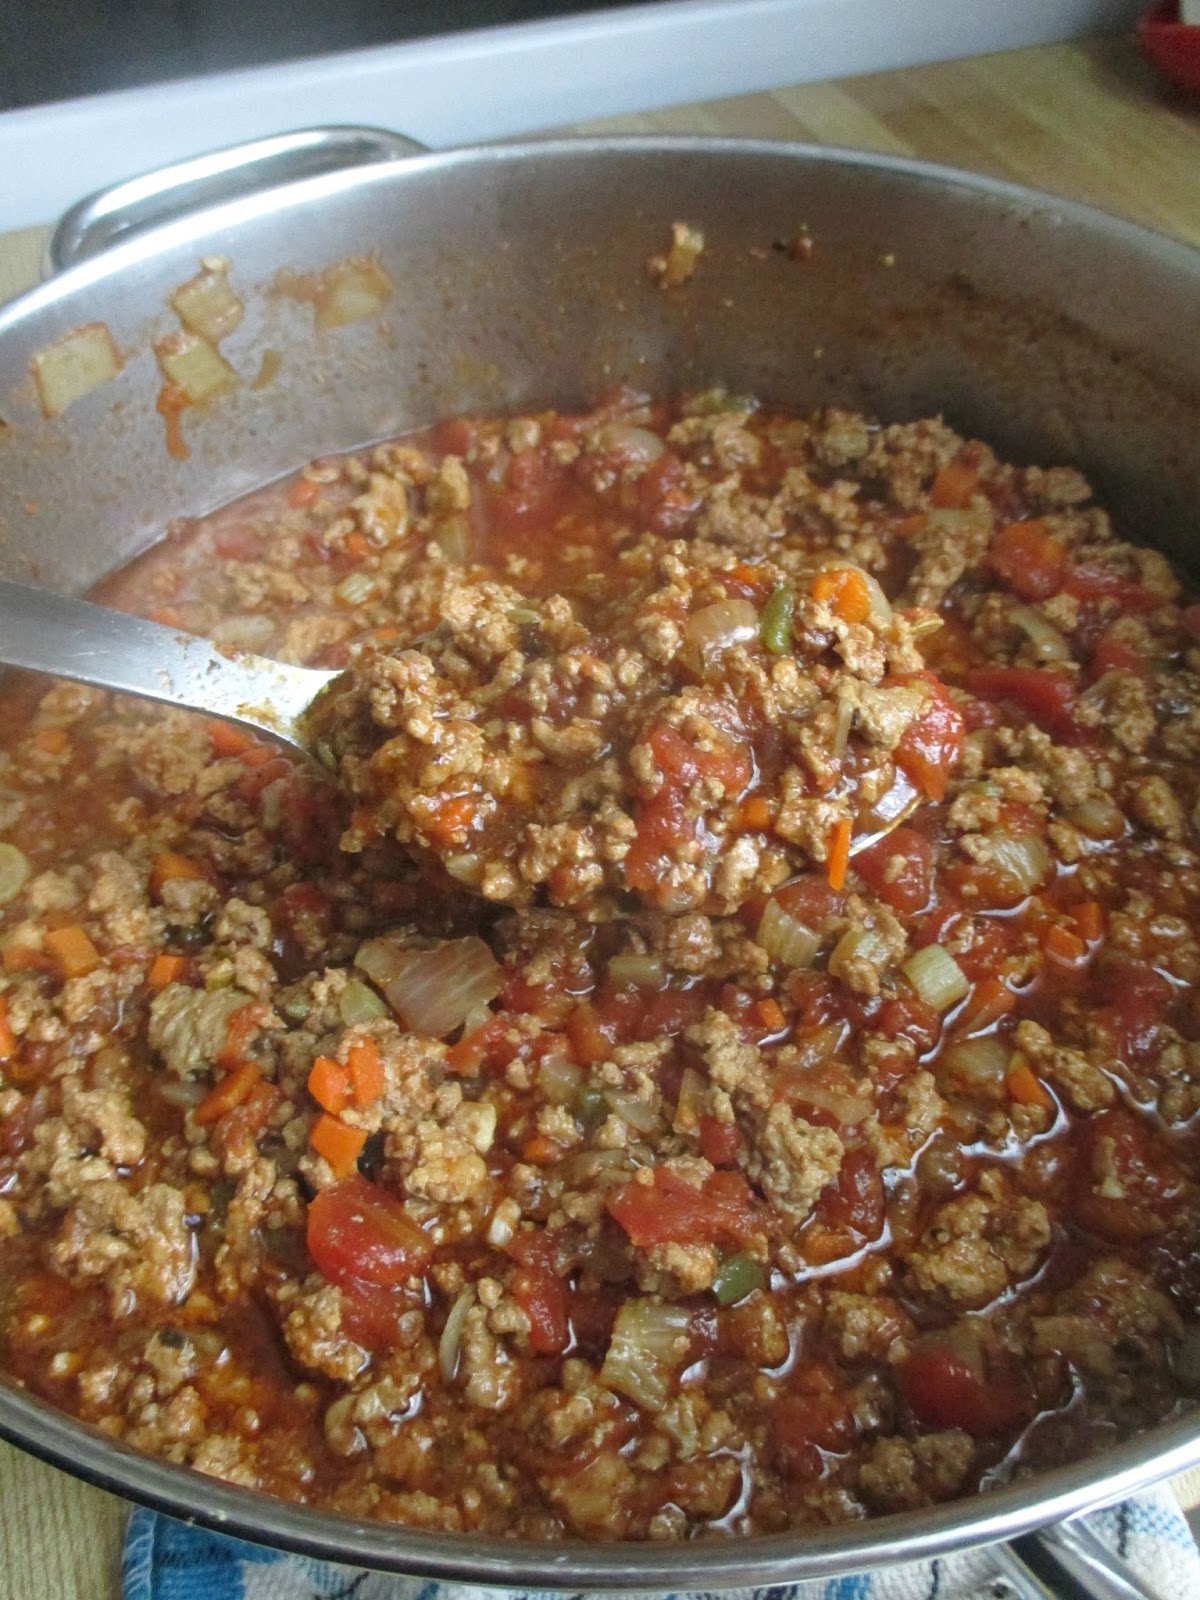 Hot and Cold Running Mom - Just my Stuff: Classic Bolognese Sauce